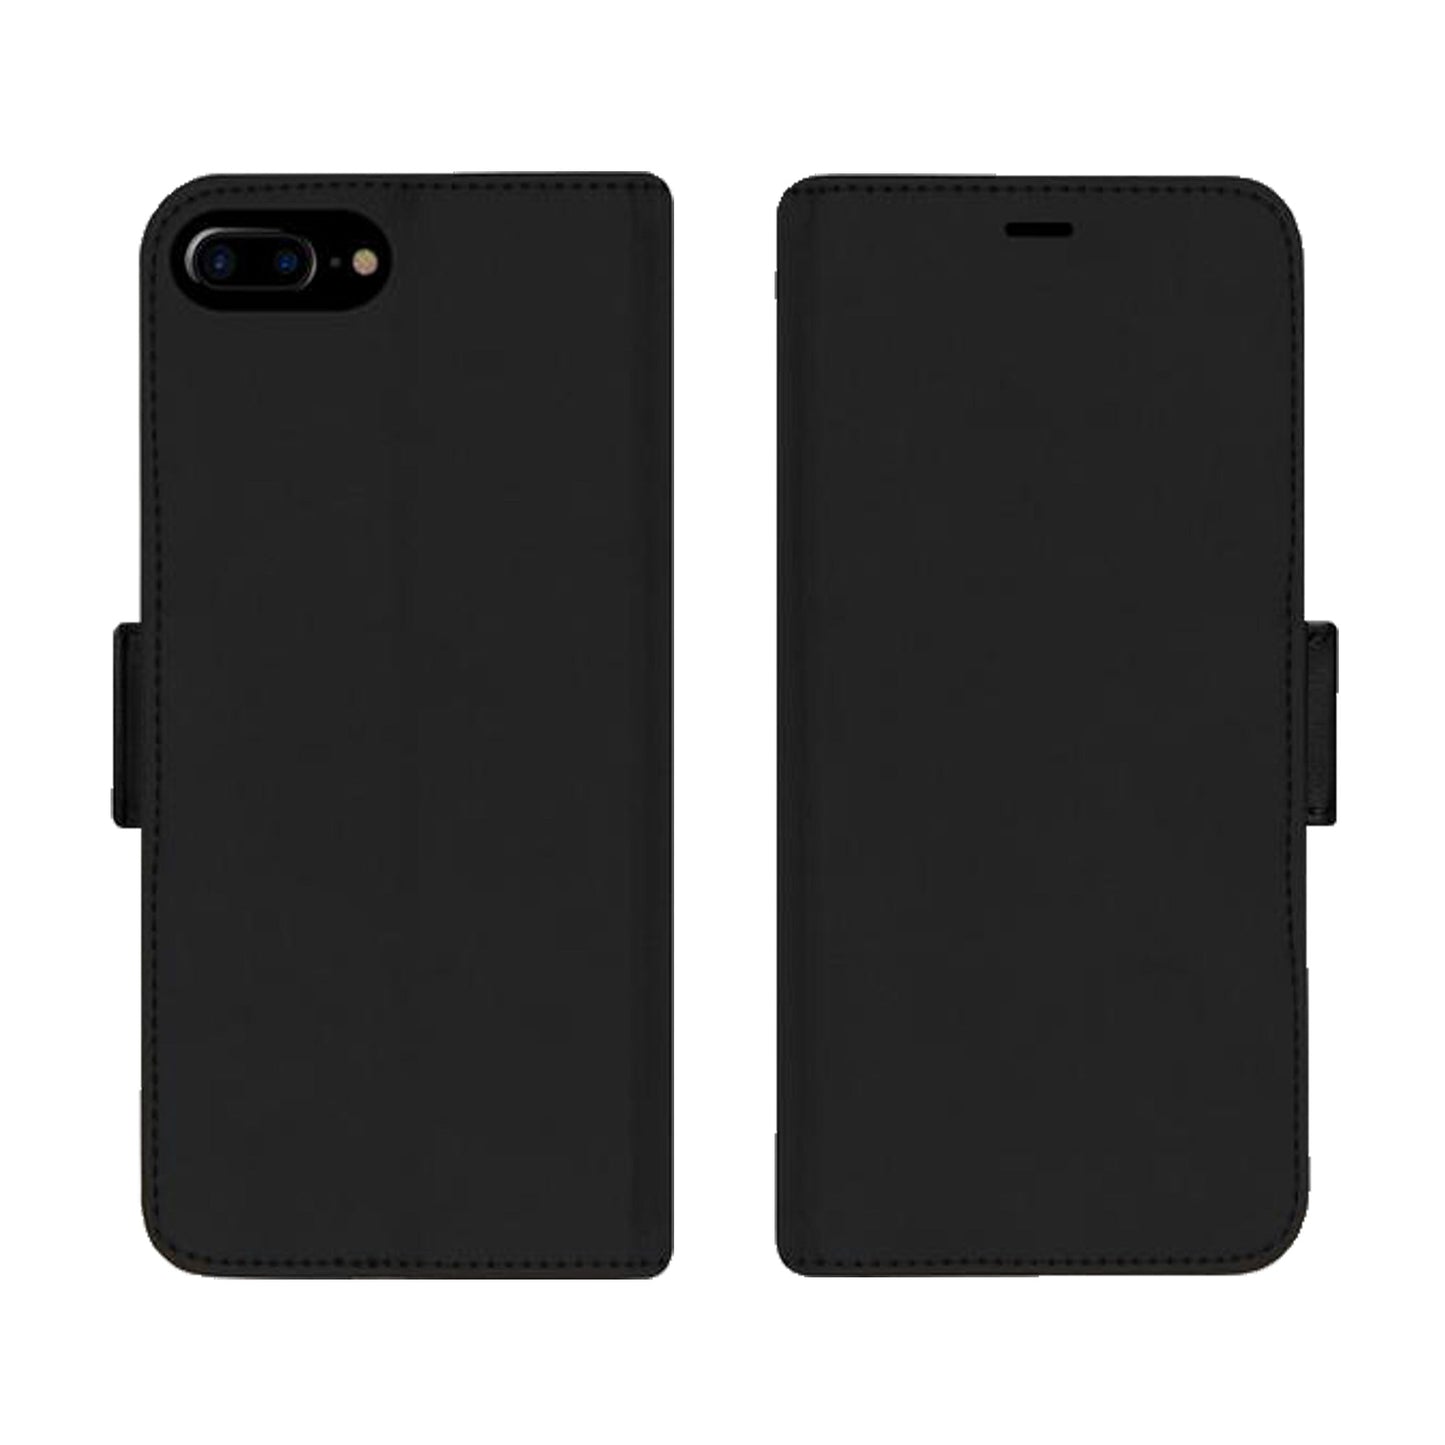 Uni Black Victor Case for iPhone and Samsung